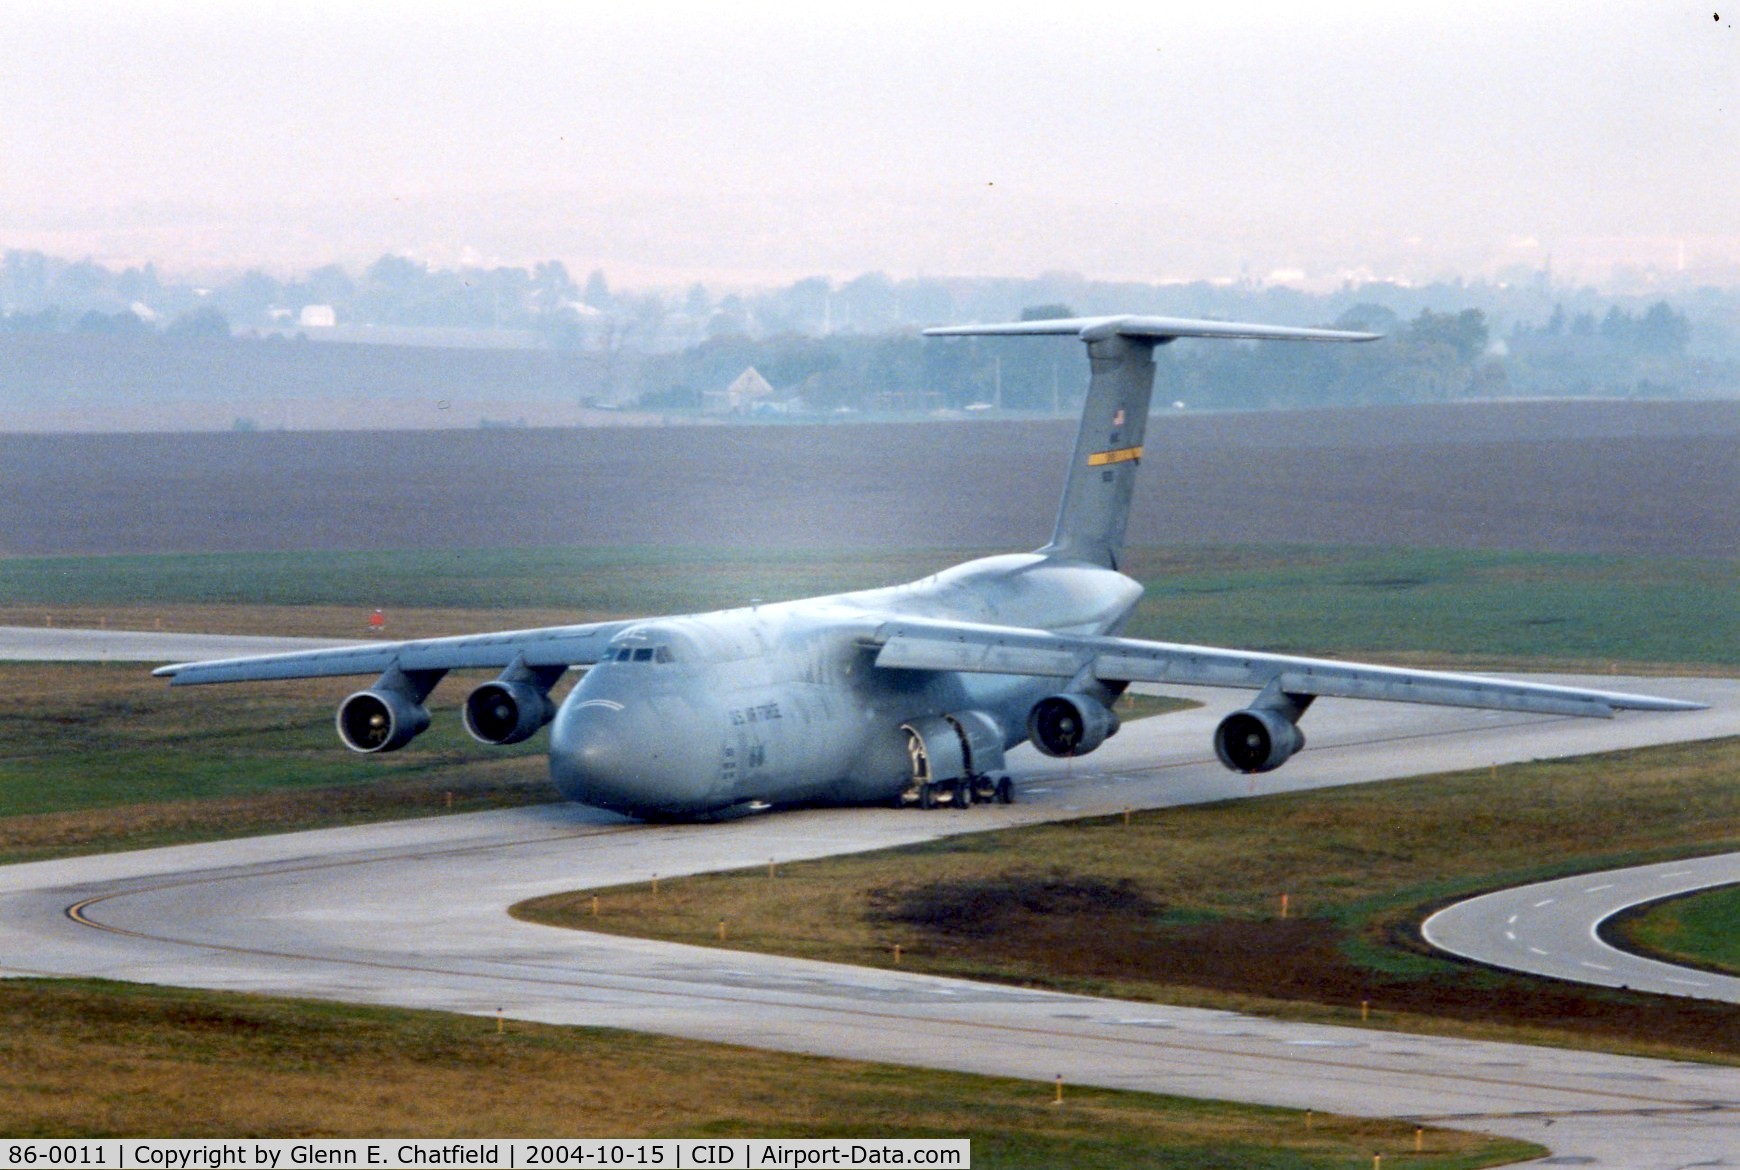 86-0011, 1986 Lockheed C-5M Super Galaxy C/N 500-0097, C-5B in for Presidential support.  Shot from the tower